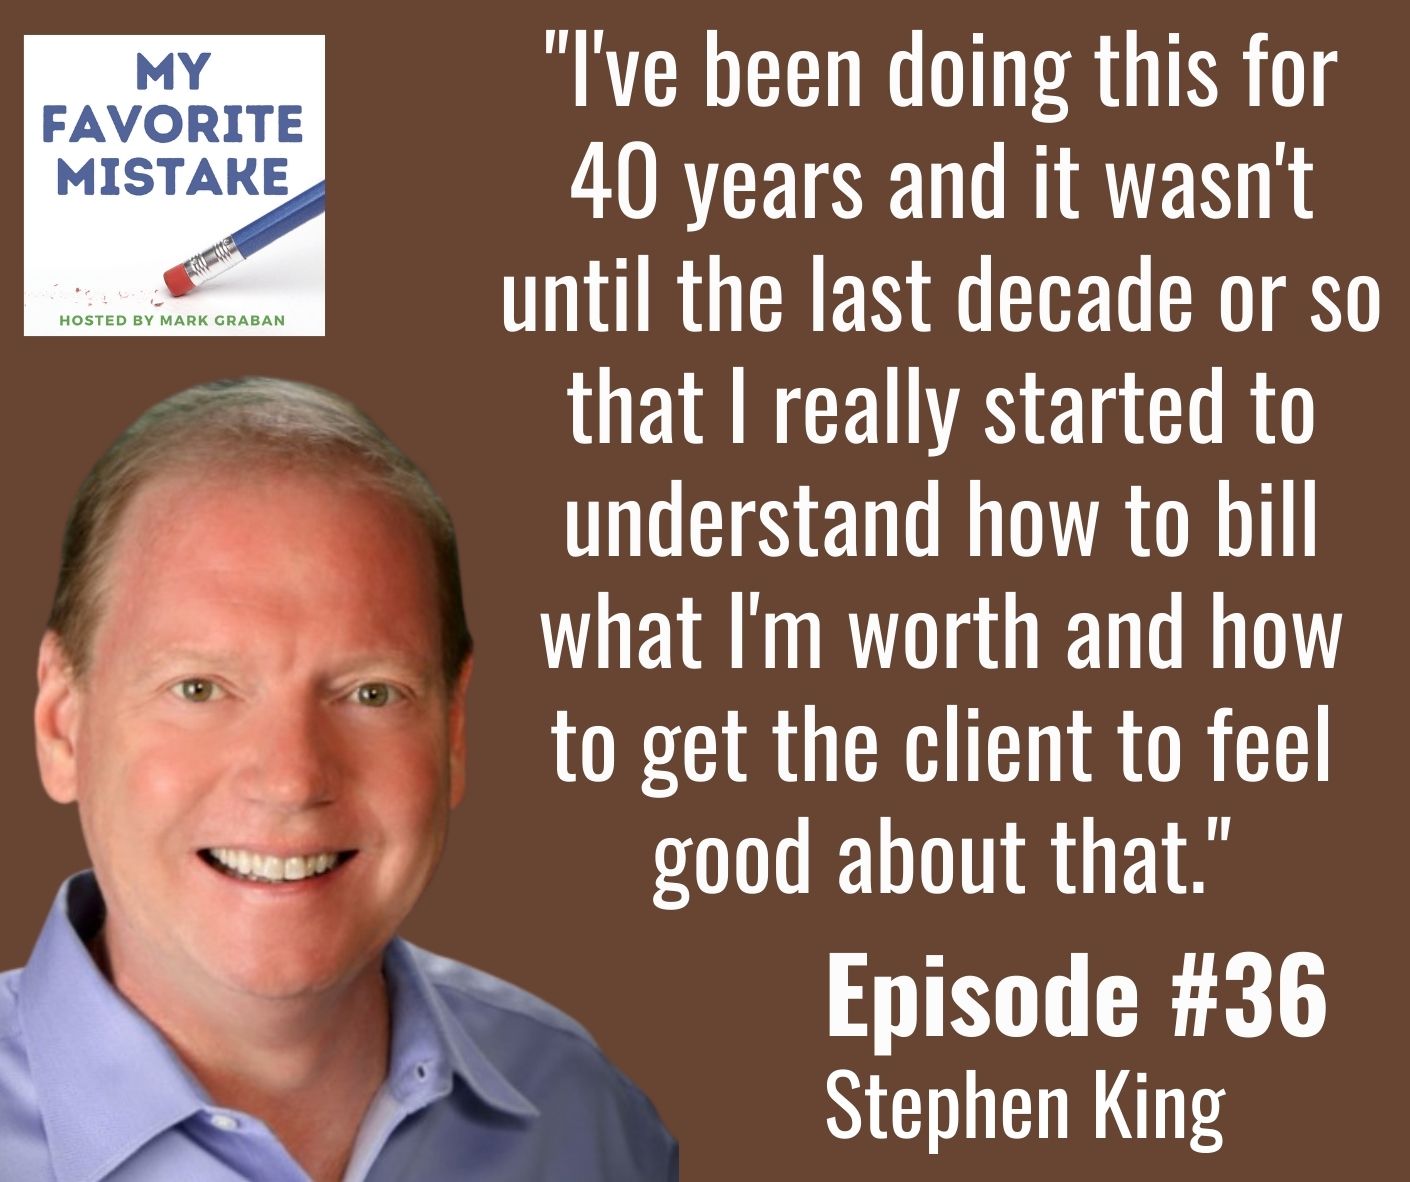 "I've been doing this for 40 years and it wasn't until the last decade or so that I really started to understand how to bill what I'm worth and how to get the client to feel good about that."